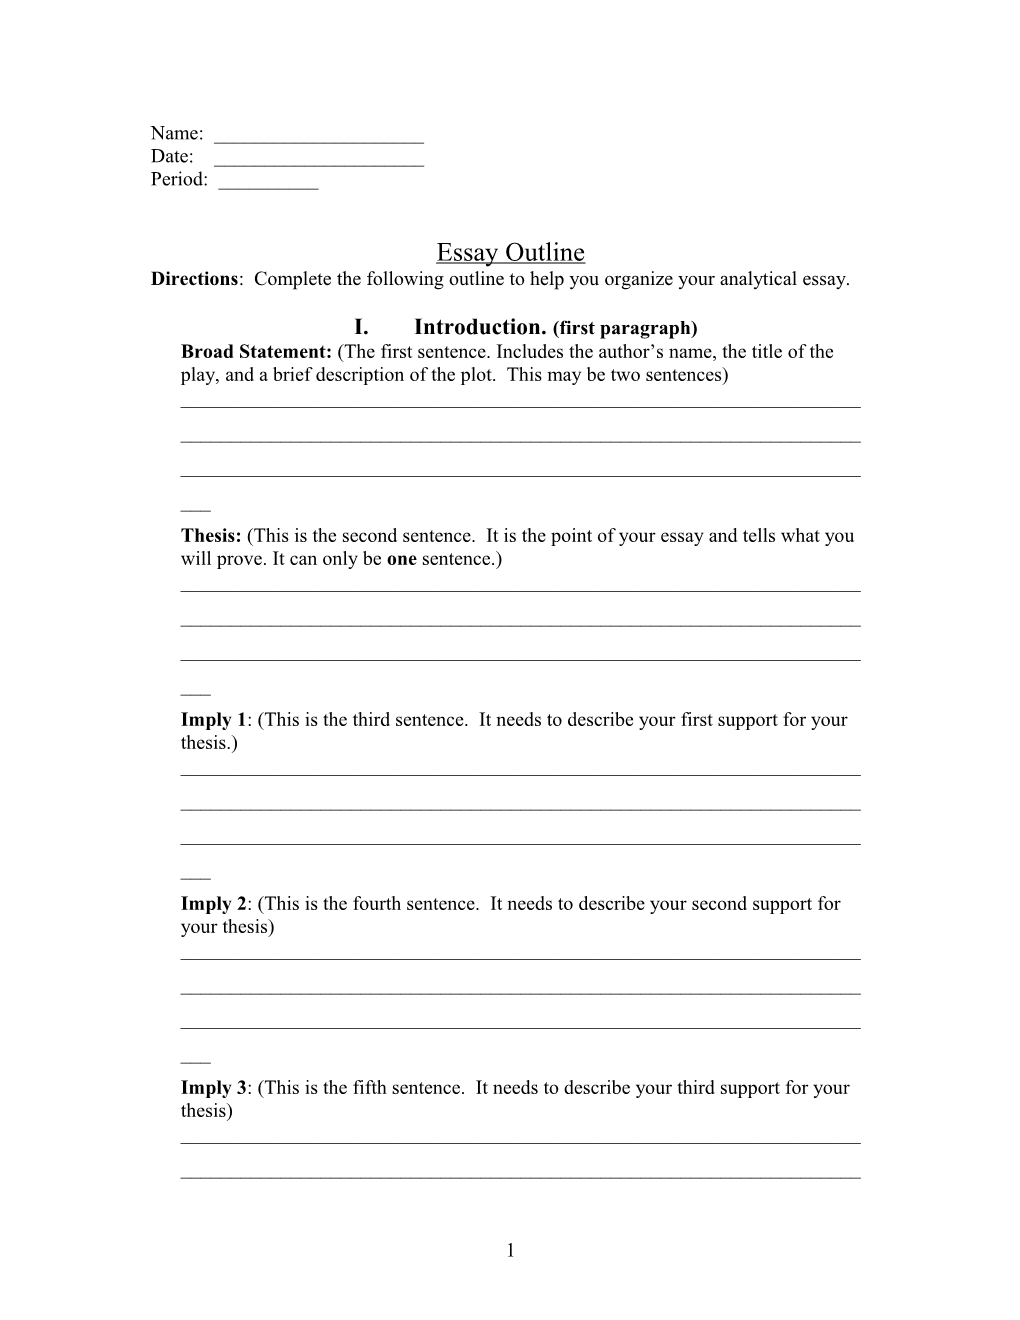 Directions: Complete the Following Outline to Help You Organize Your Analytical Essay